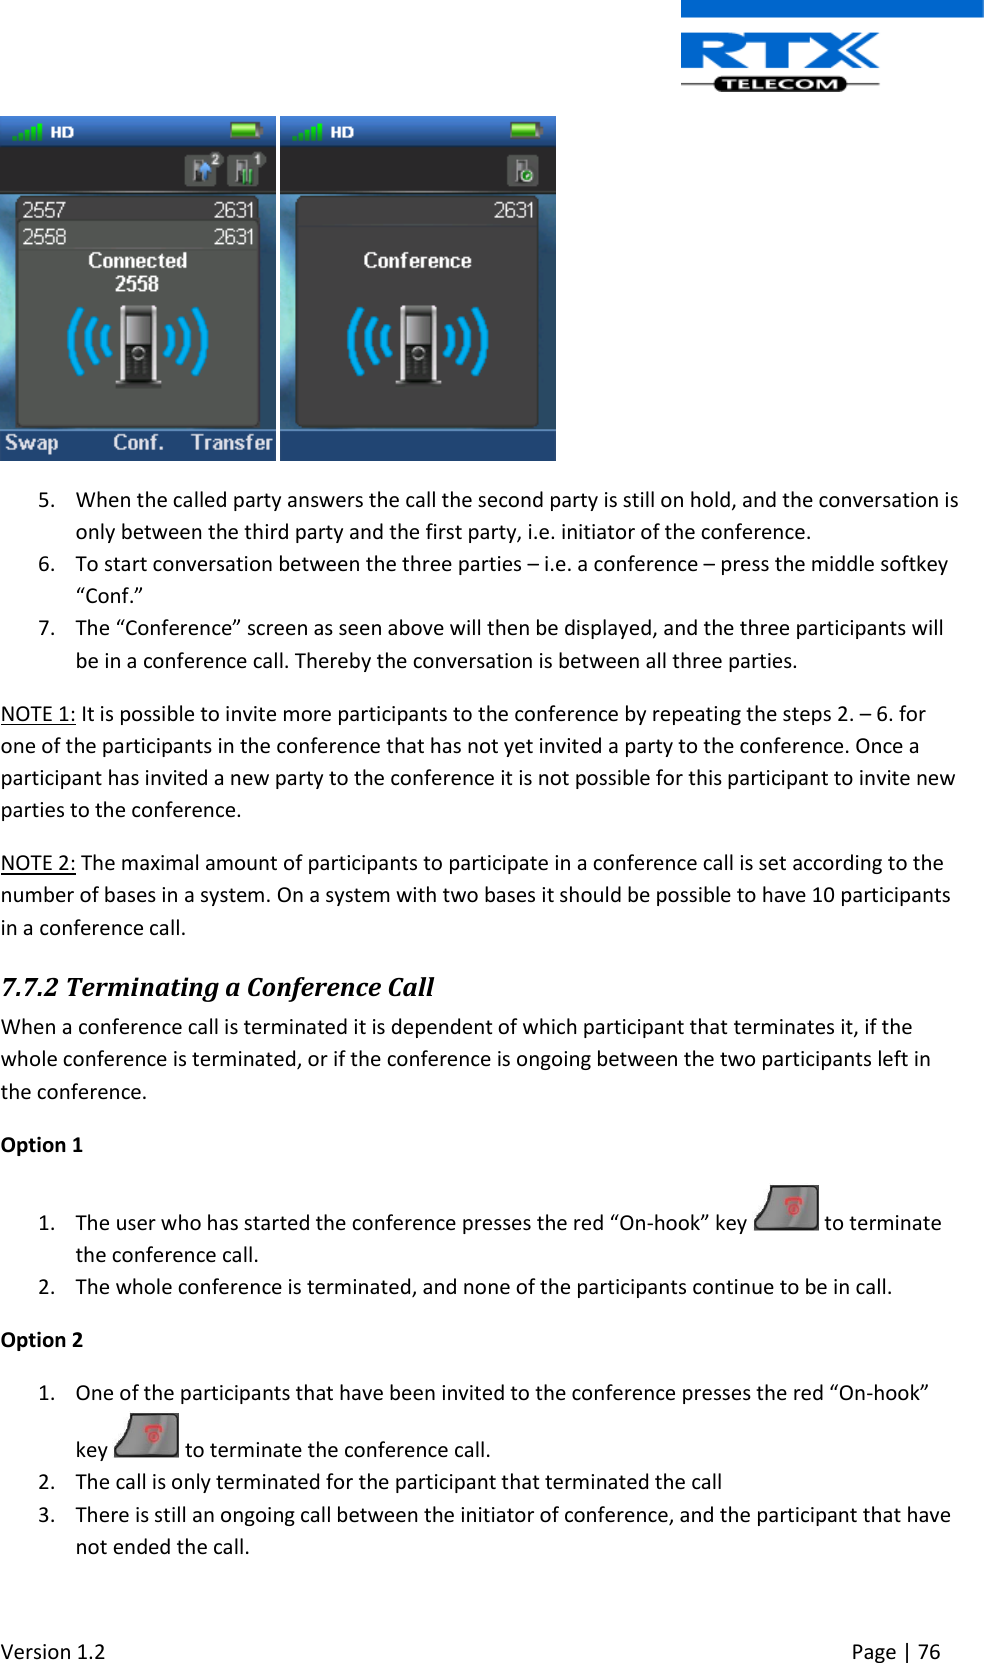  Version 1.2     Page | 76      5. When the called party answers the call the second party is still on hold, and the conversation is only between the third party and the first party, i.e. initiator of the conference. 6. To start conversation between the three parties – i.e. a conference – press the middle softkey “Conf.” 7. The “Conference” screen as seen above will then be displayed, and the three participants will be in a conference call. Thereby the conversation is between all three parties. NOTE 1: It is possible to invite more participants to the conference by repeating the steps 2. – 6. for one of the participants in the conference that has not yet invited a party to the conference. Once a participant has invited a new party to the conference it is not possible for this participant to invite new parties to the conference.  NOTE 2: The maximal amount of participants to participate in a conference call is set according to the number of bases in a system. On a system with two bases it should be possible to have 10 participants in a conference call. 7.7.2 Terminating a Conference Call When a conference call is terminated it is dependent of which participant that terminates it, if the whole conference is terminated, or if the conference is ongoing between the two participants left in the conference. Option 1 1. The user who has started the conference presses the red “On-hook” key   to terminate the conference call. 2. The whole conference is terminated, and none of the participants continue to be in call. Option 2 1. One of the participants that have been invited to the conference presses the red “On-hook” key   to terminate the conference call. 2. The call is only terminated for the participant that terminated the call 3. There is still an ongoing call between the initiator of conference, and the participant that have not ended the call. 